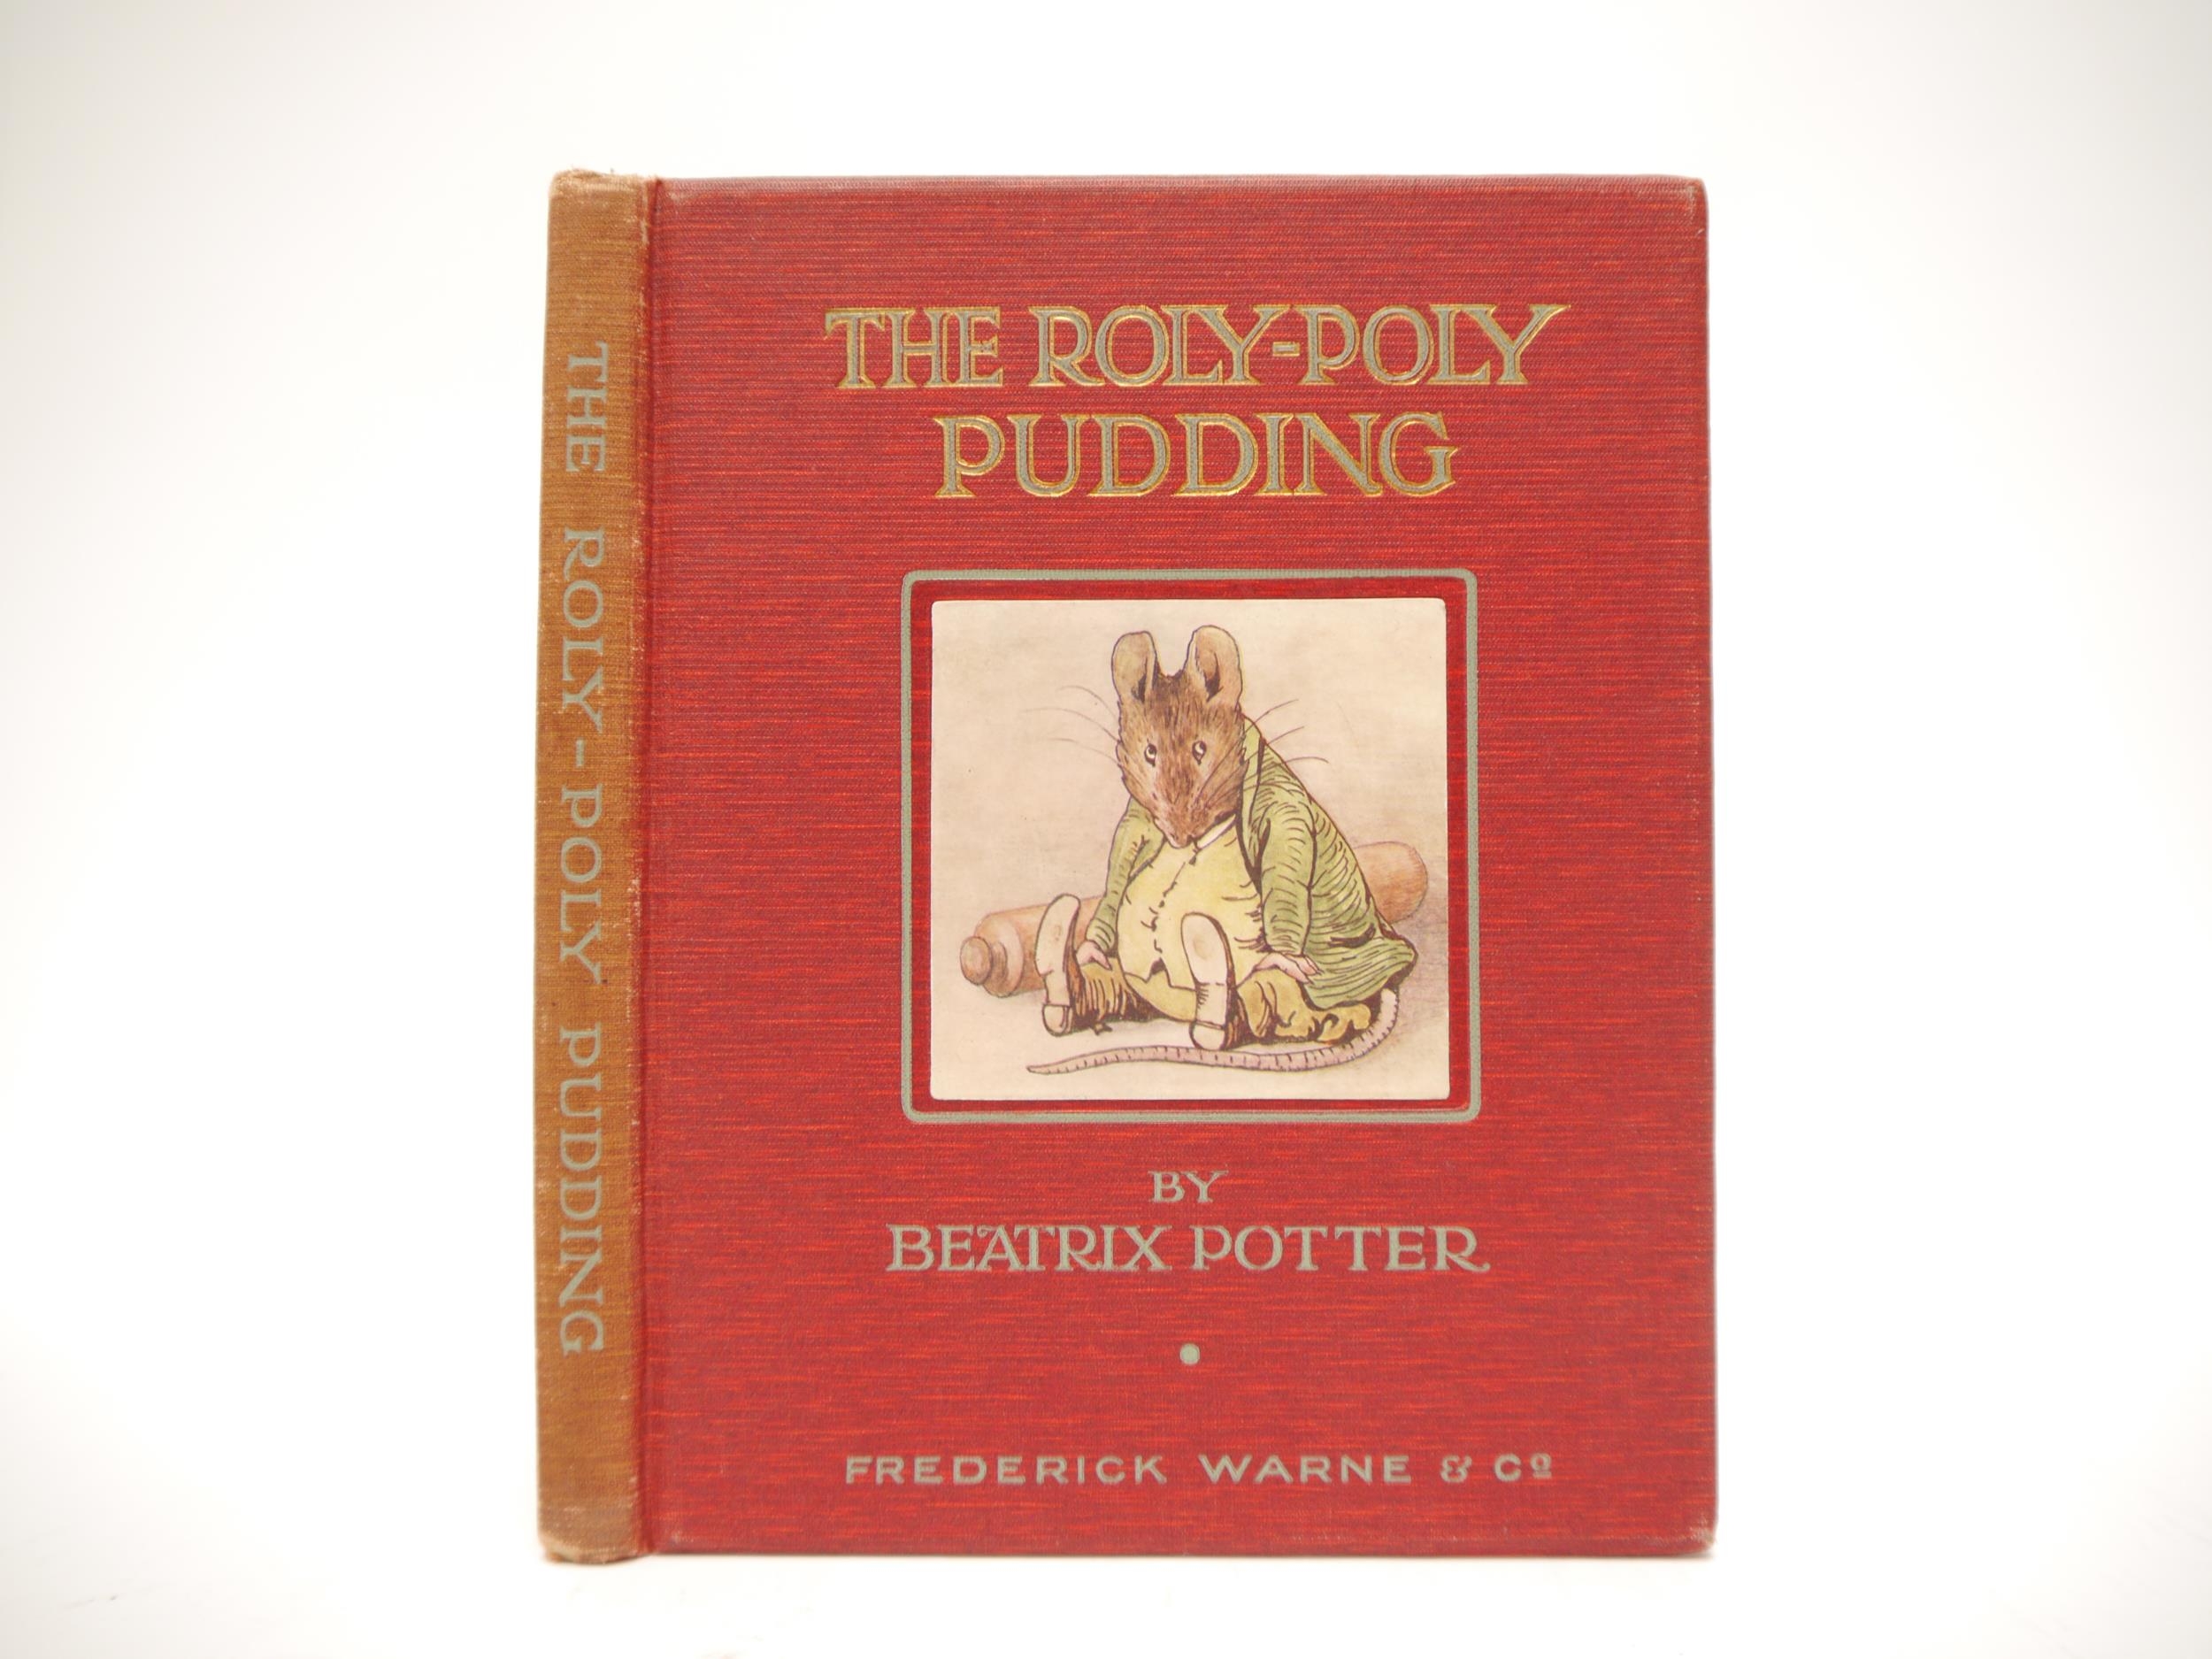 Beatrix Potter: 'The Roly-Poly Pudding', London, Frederick Warne, 1908, 1st edition, 1st issue ( - Image 5 of 7